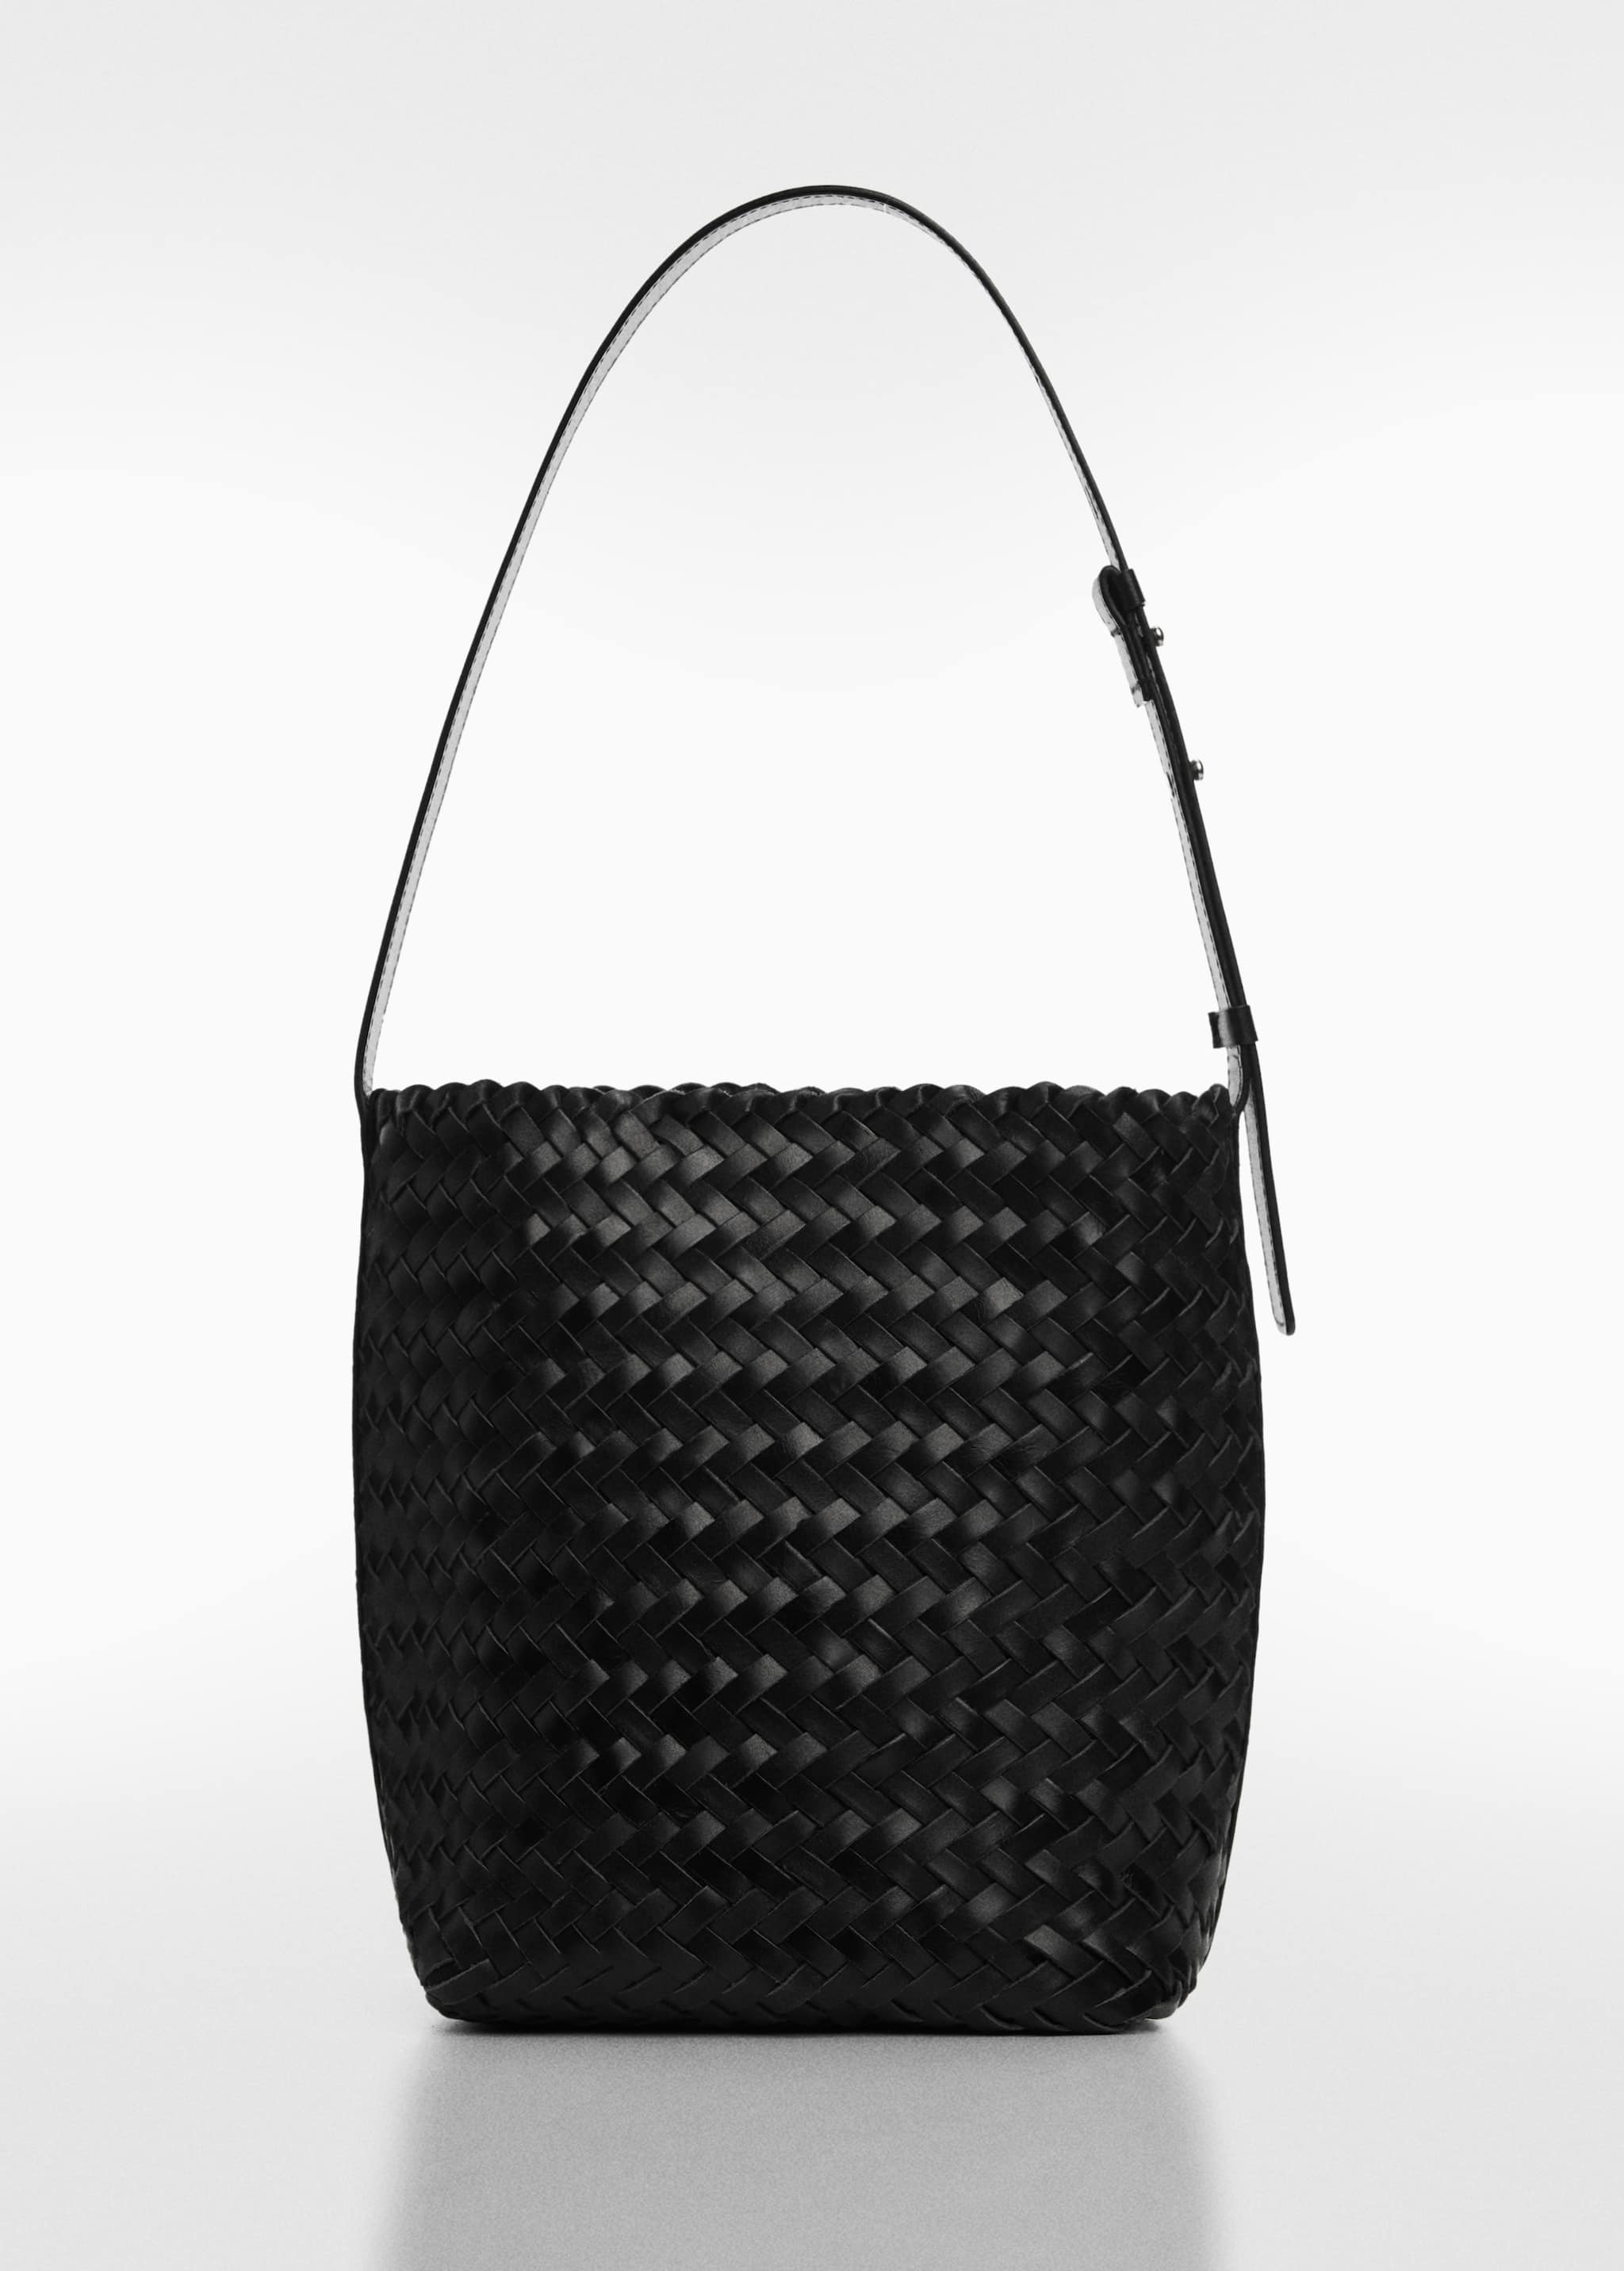 Braided leather bag - Article without model